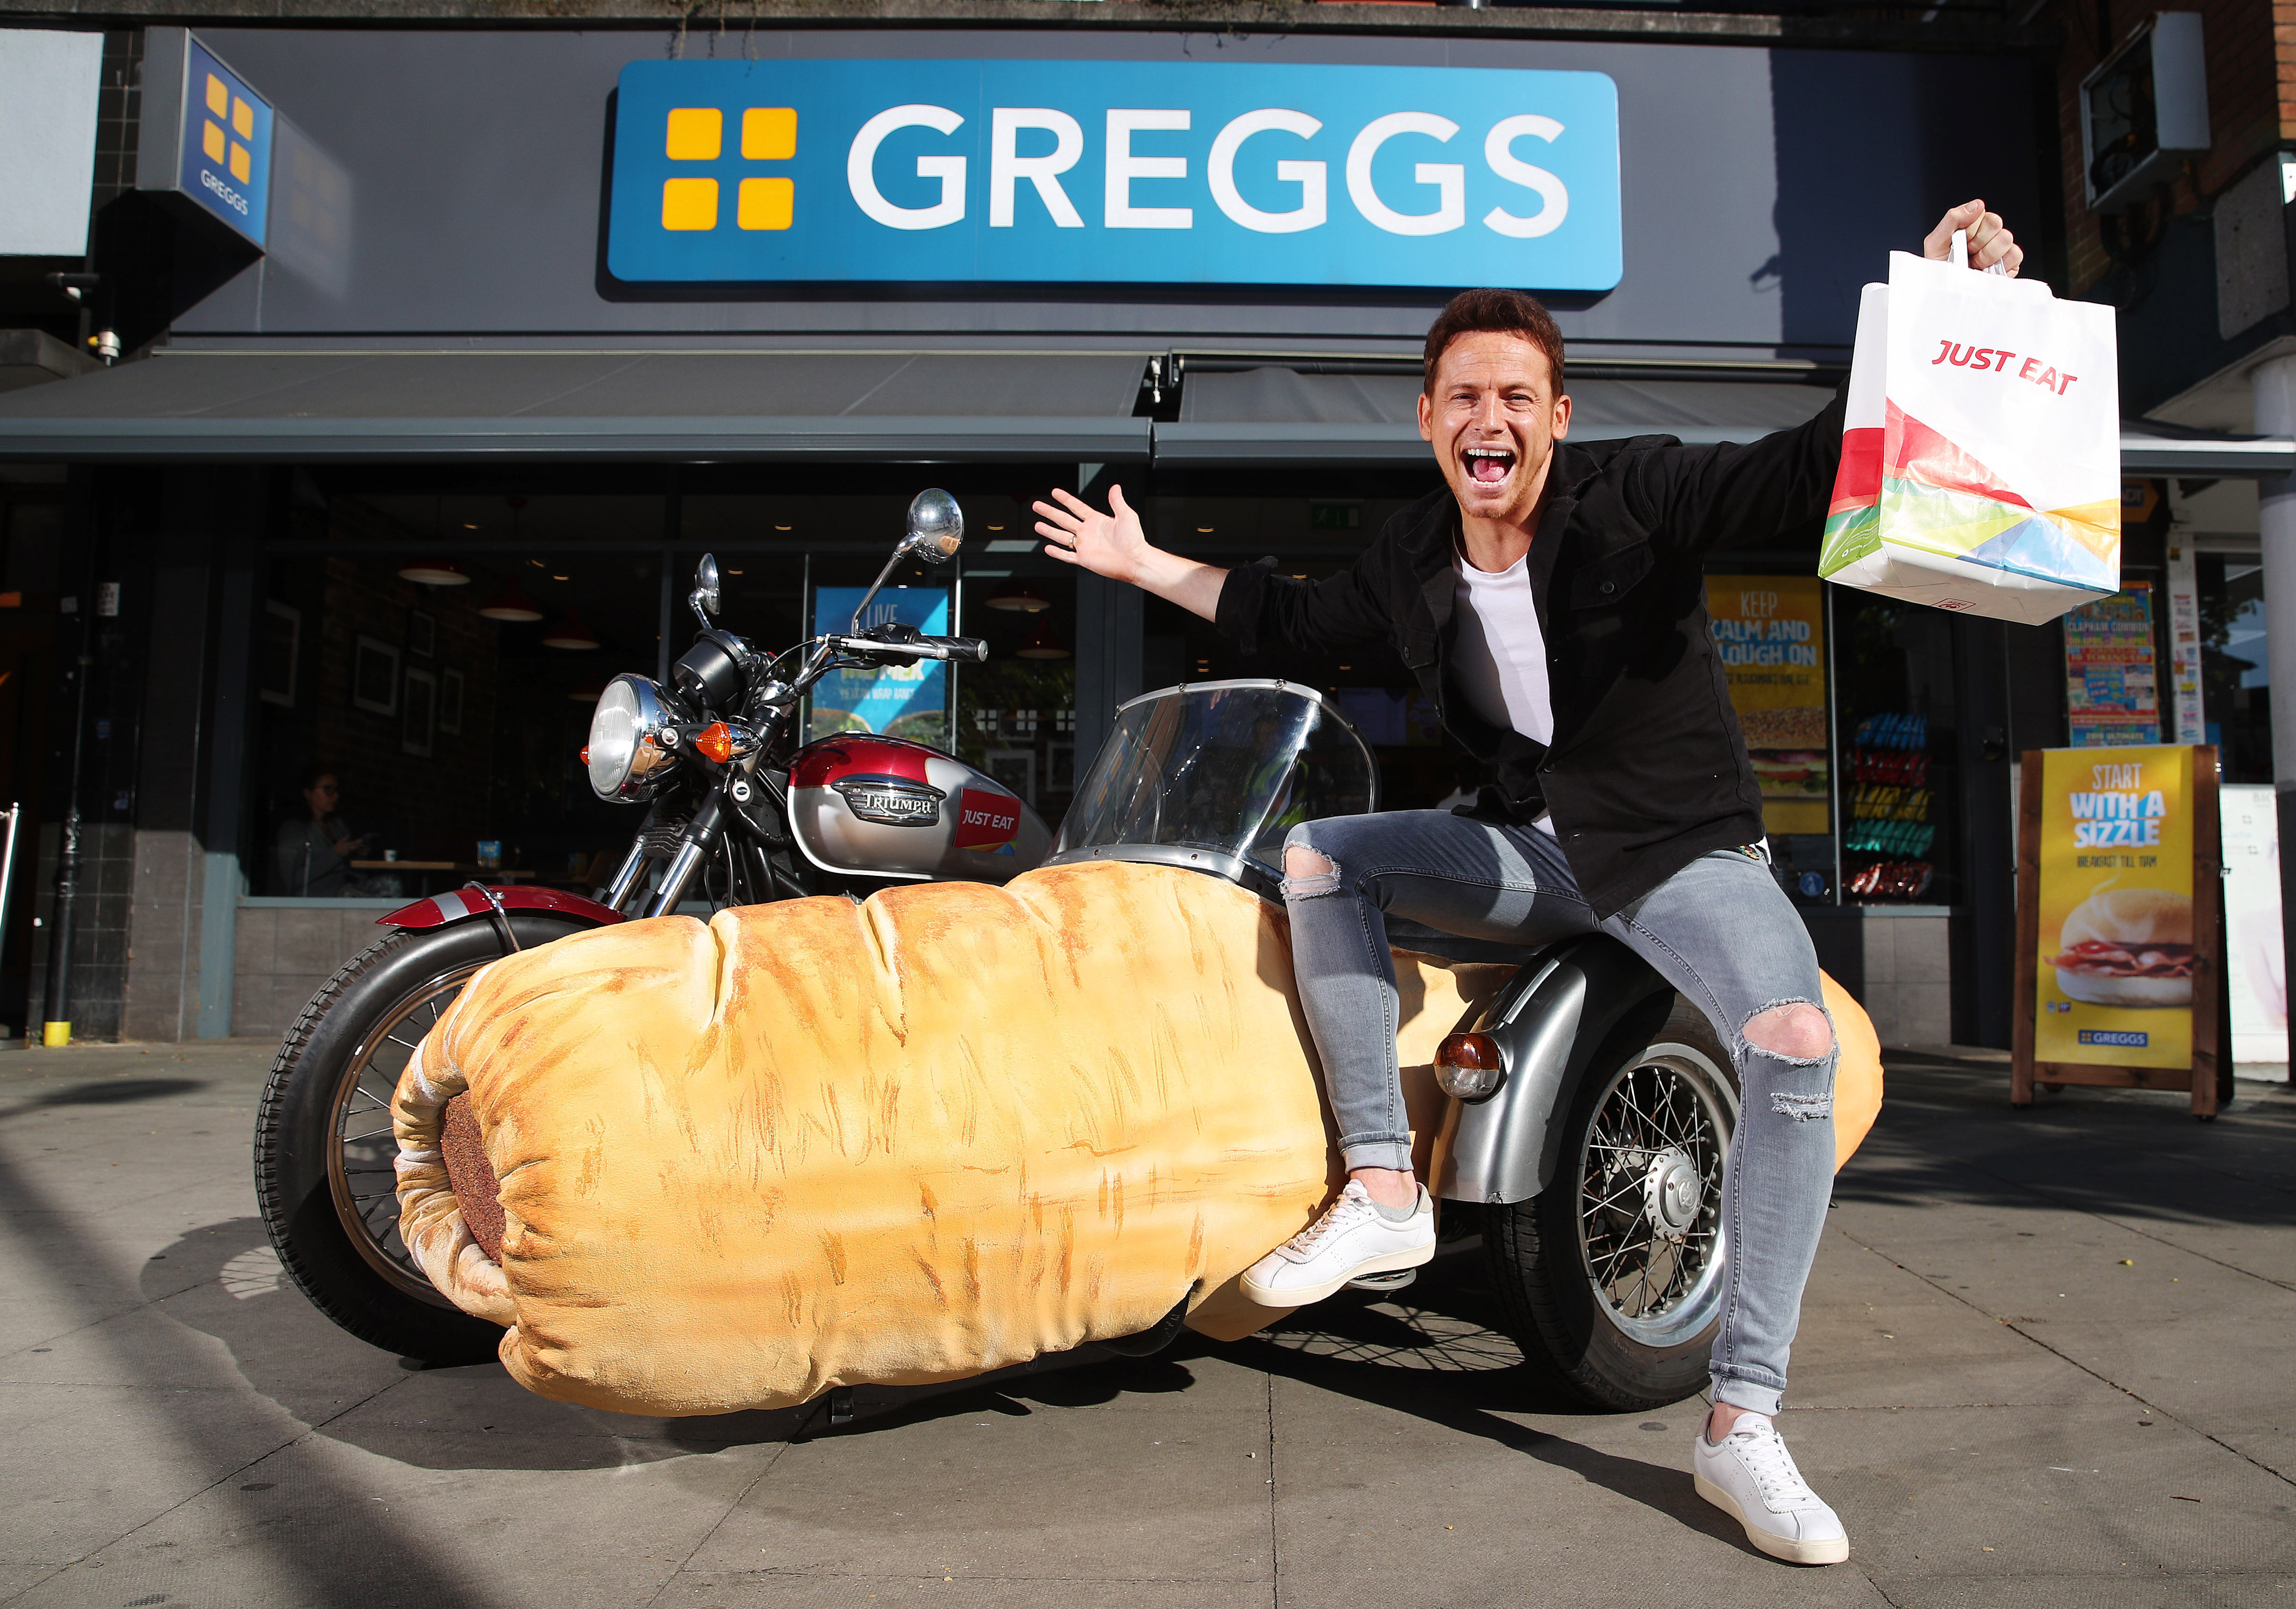 The world’s first Sausage Roll-Mobile was unveiled today by self-confessed Greggs fan Joe Swash, as it hit the road in London to celebrate Greggs now being available for delivery on leading global online food delivery service, Just Eat.  The new partnership is currently live in London, Newcastle and Glasgow and available to order via the Just Eat app or online at just-eat.co.uk.